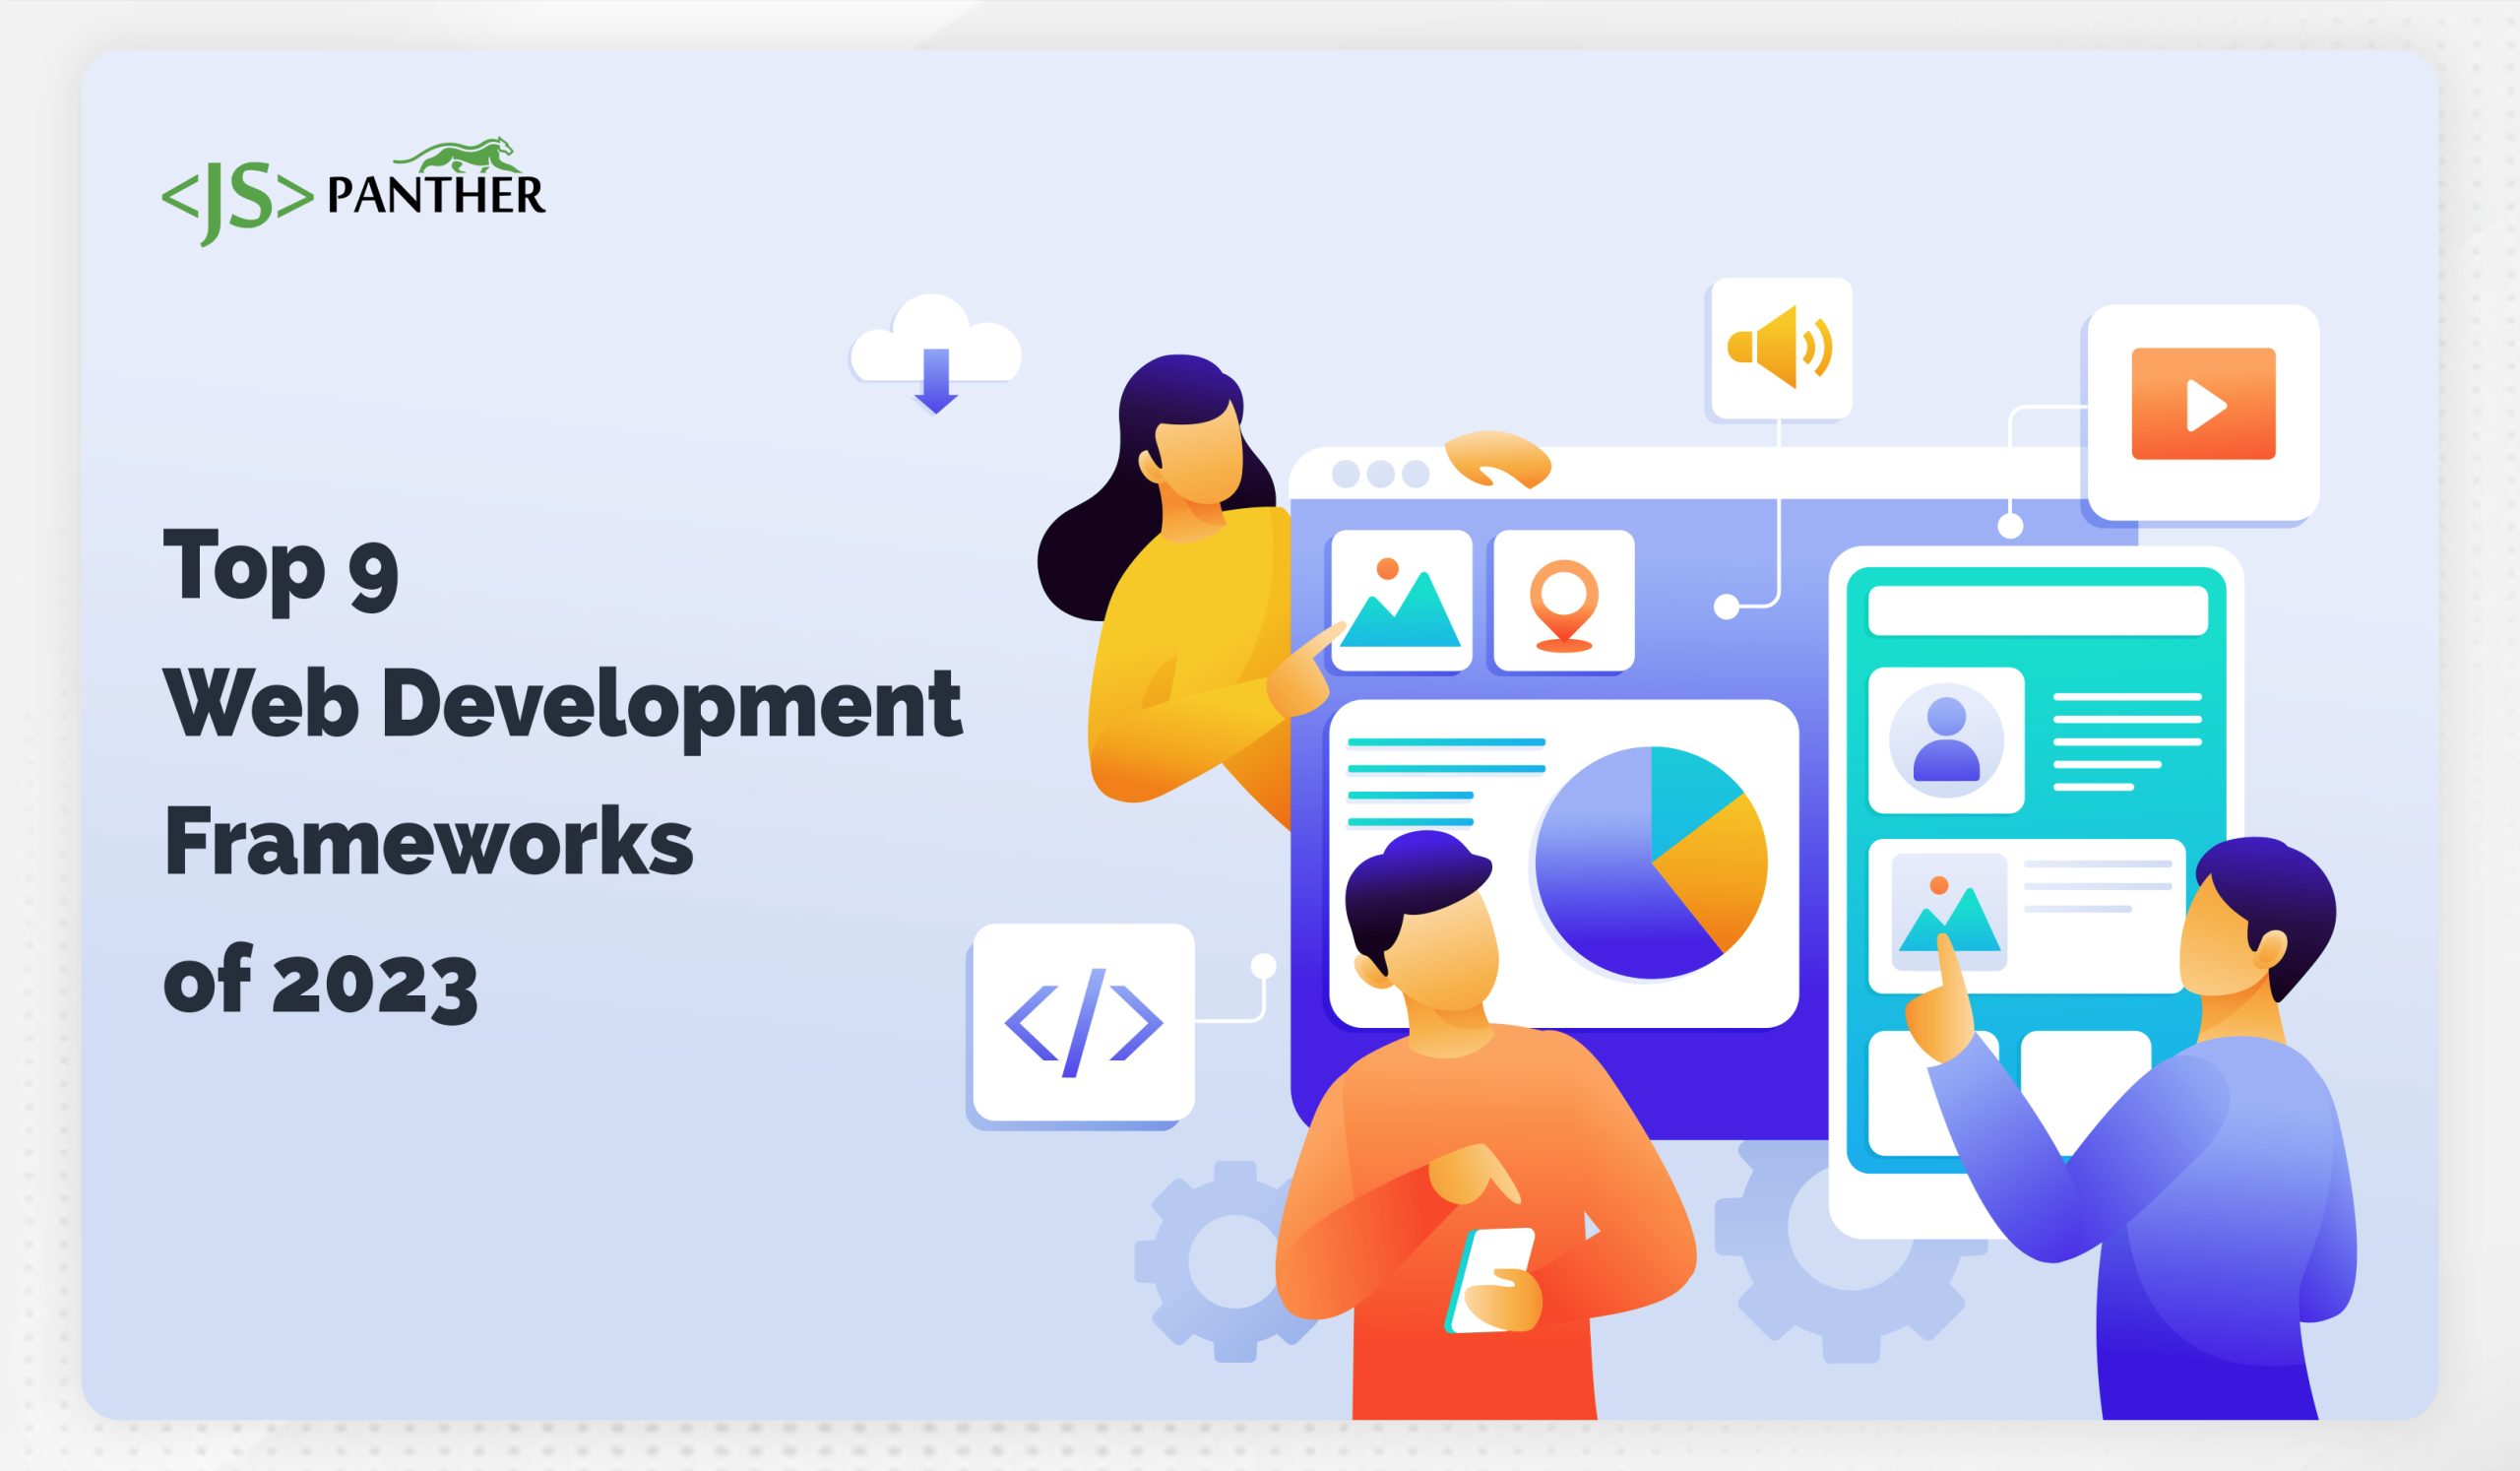 Top 9 Popular Web Development Frameworks to Use in 2023